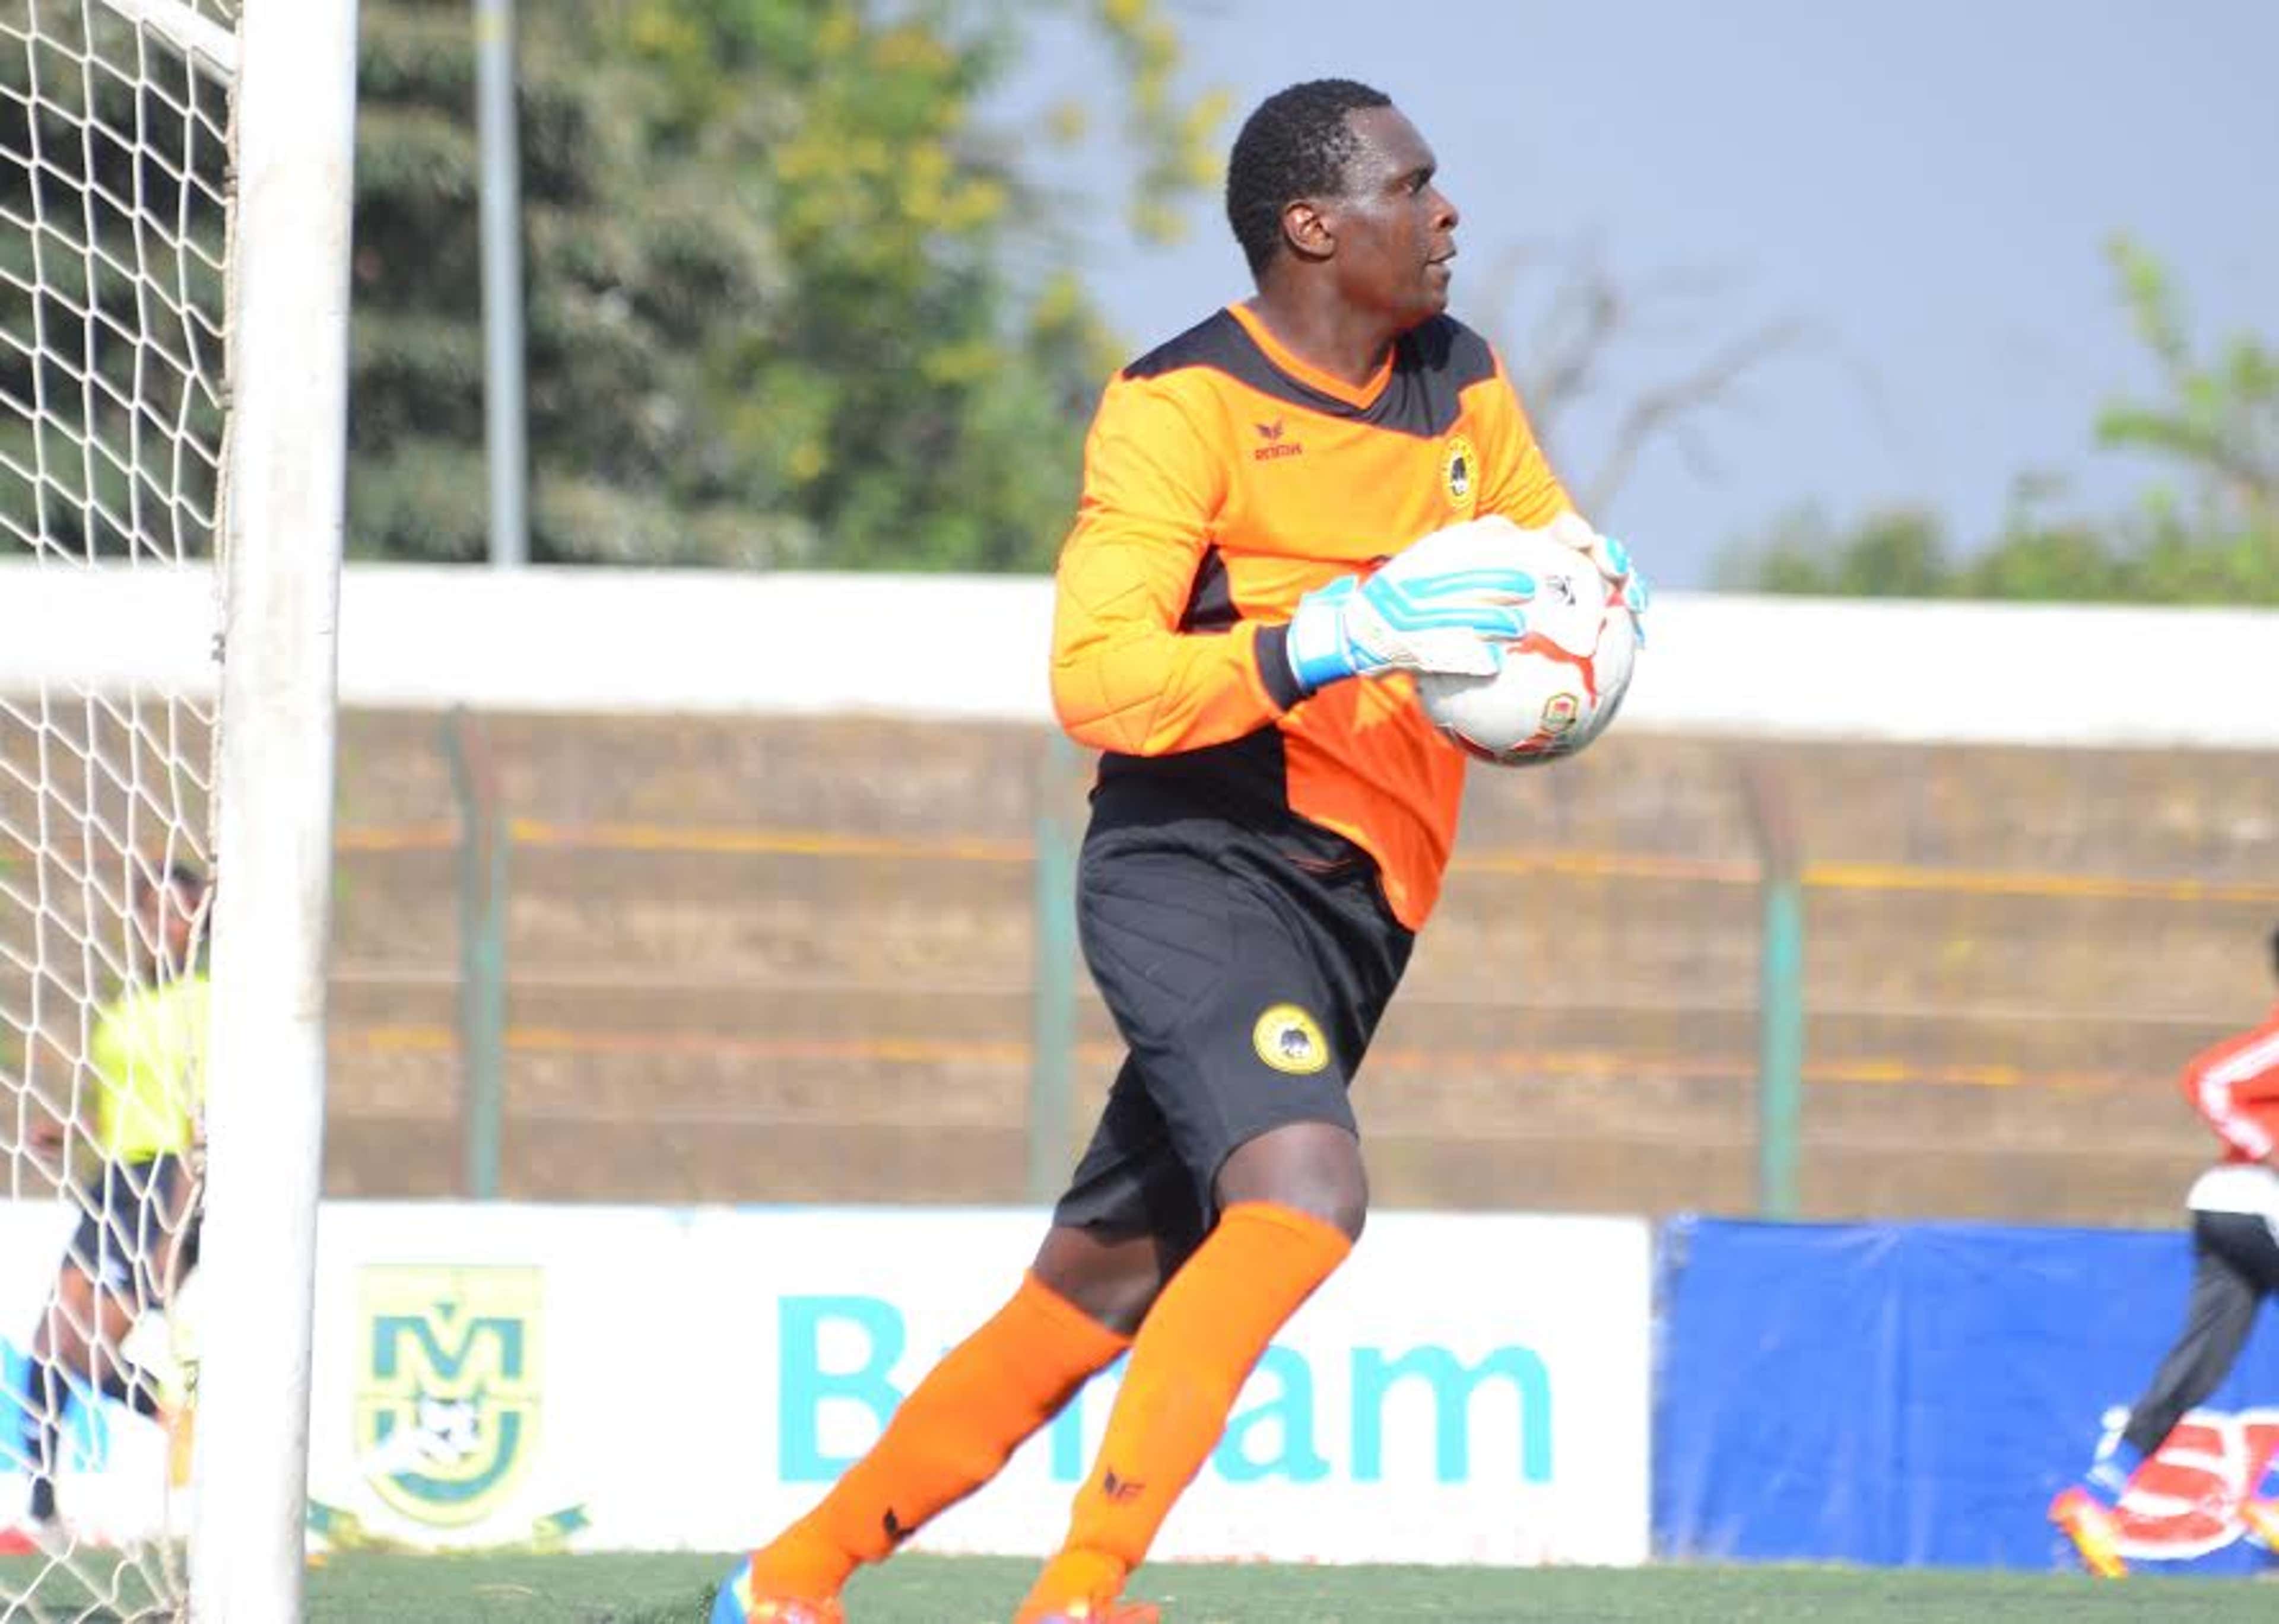 Tusker goalkeeper Duncan Ochieng' was red carded against City Stars